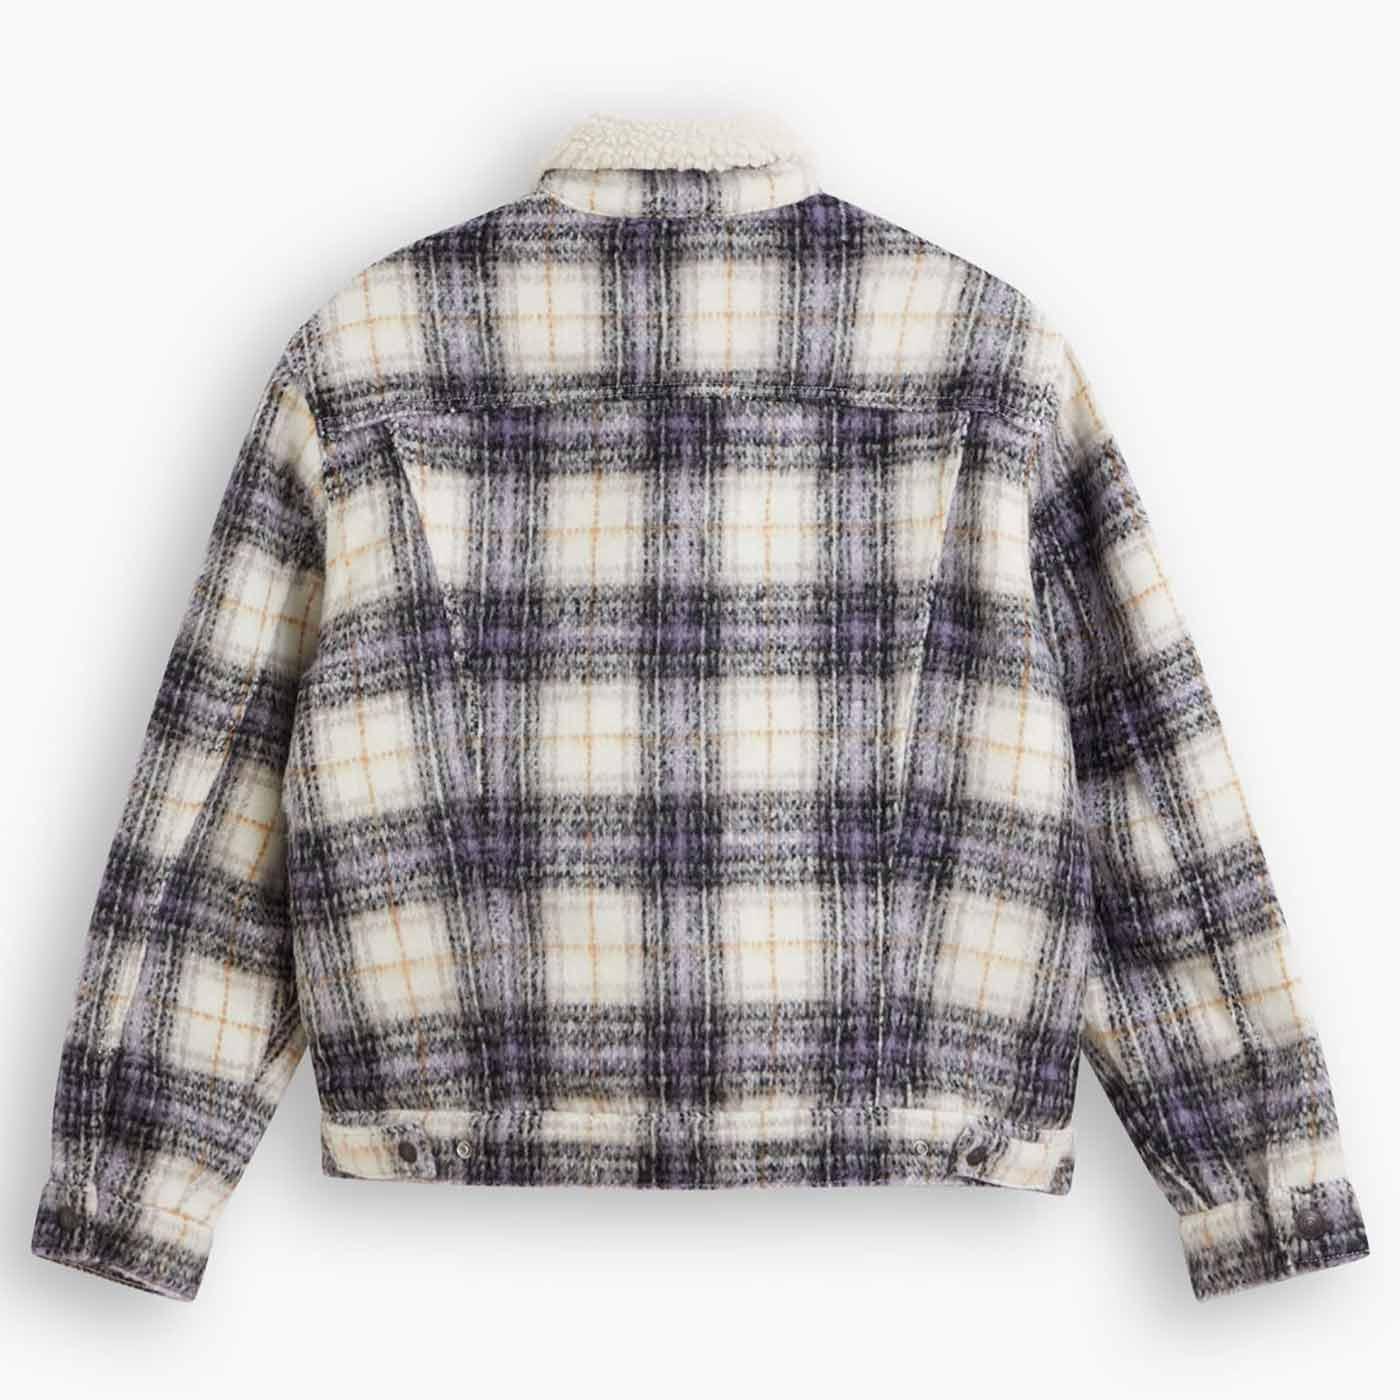 LEVI'S Vintage Fit 90s Check Sherpa Trucker Jacket in Nico Tofu